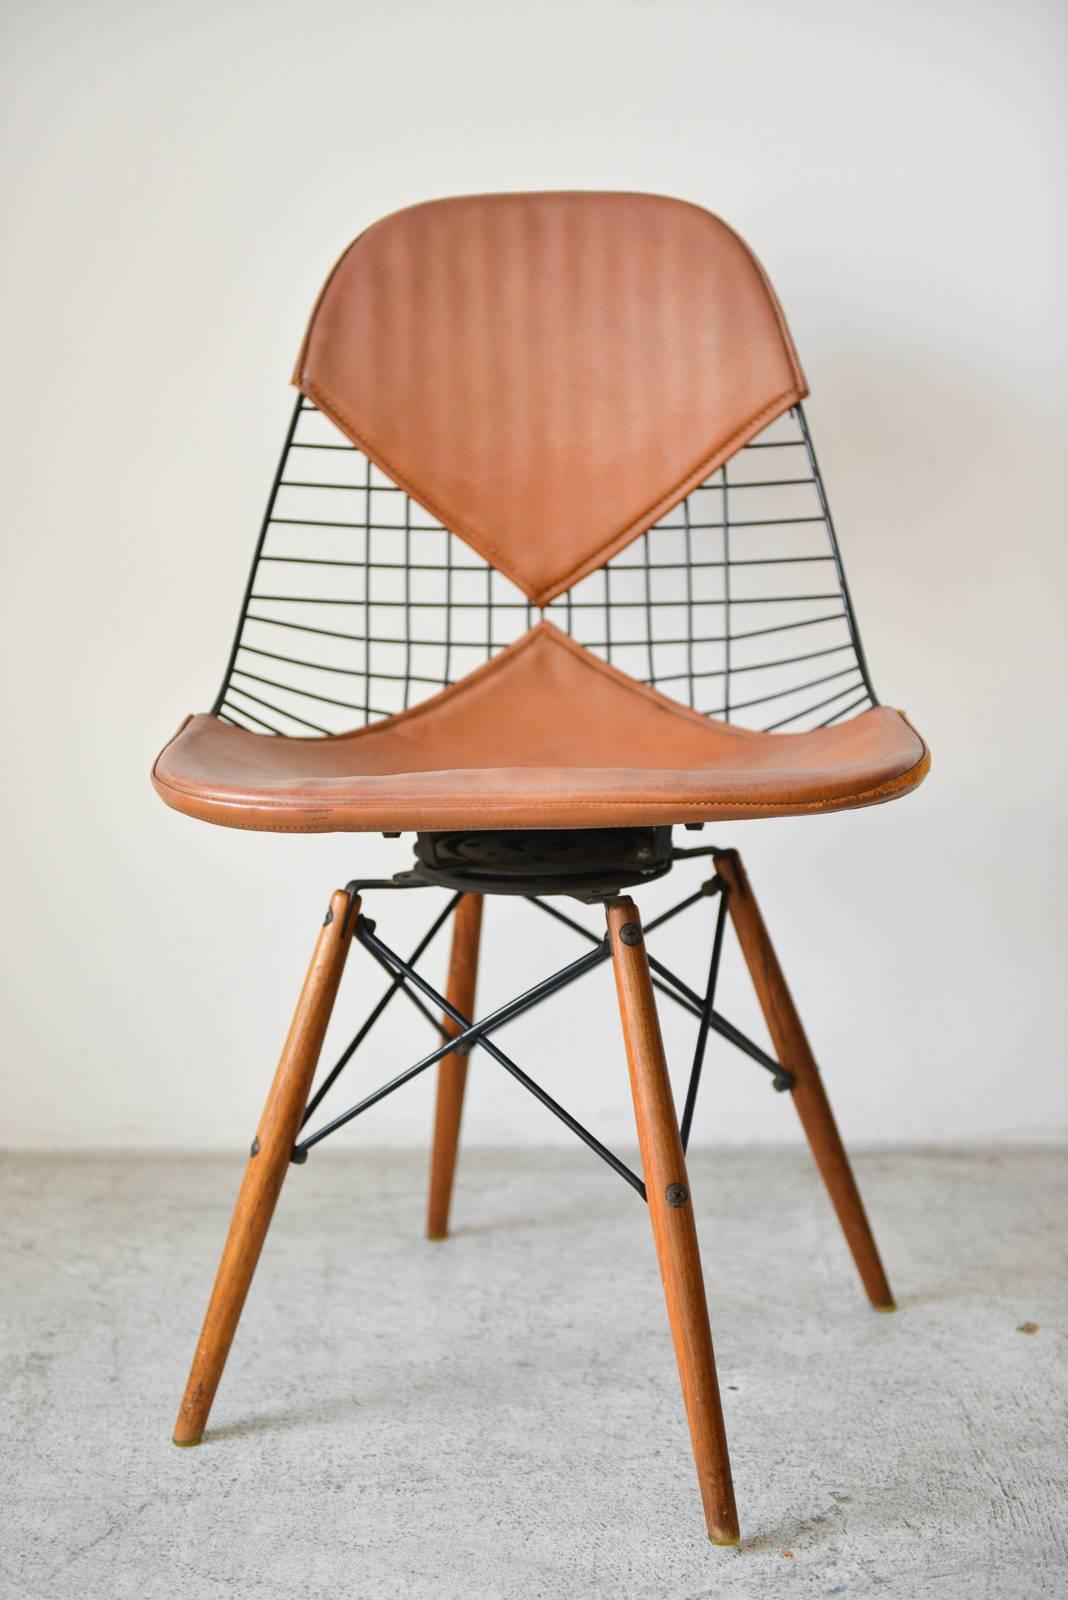 First generation Eames PKW-2 wire chair with walnut dowel legs, circa 1951. Brown saddle leather bikini cover and swivel base. Highly collectible, this particular chair has the walnut dowel legs with swivel base and beautiful patina on the saddle